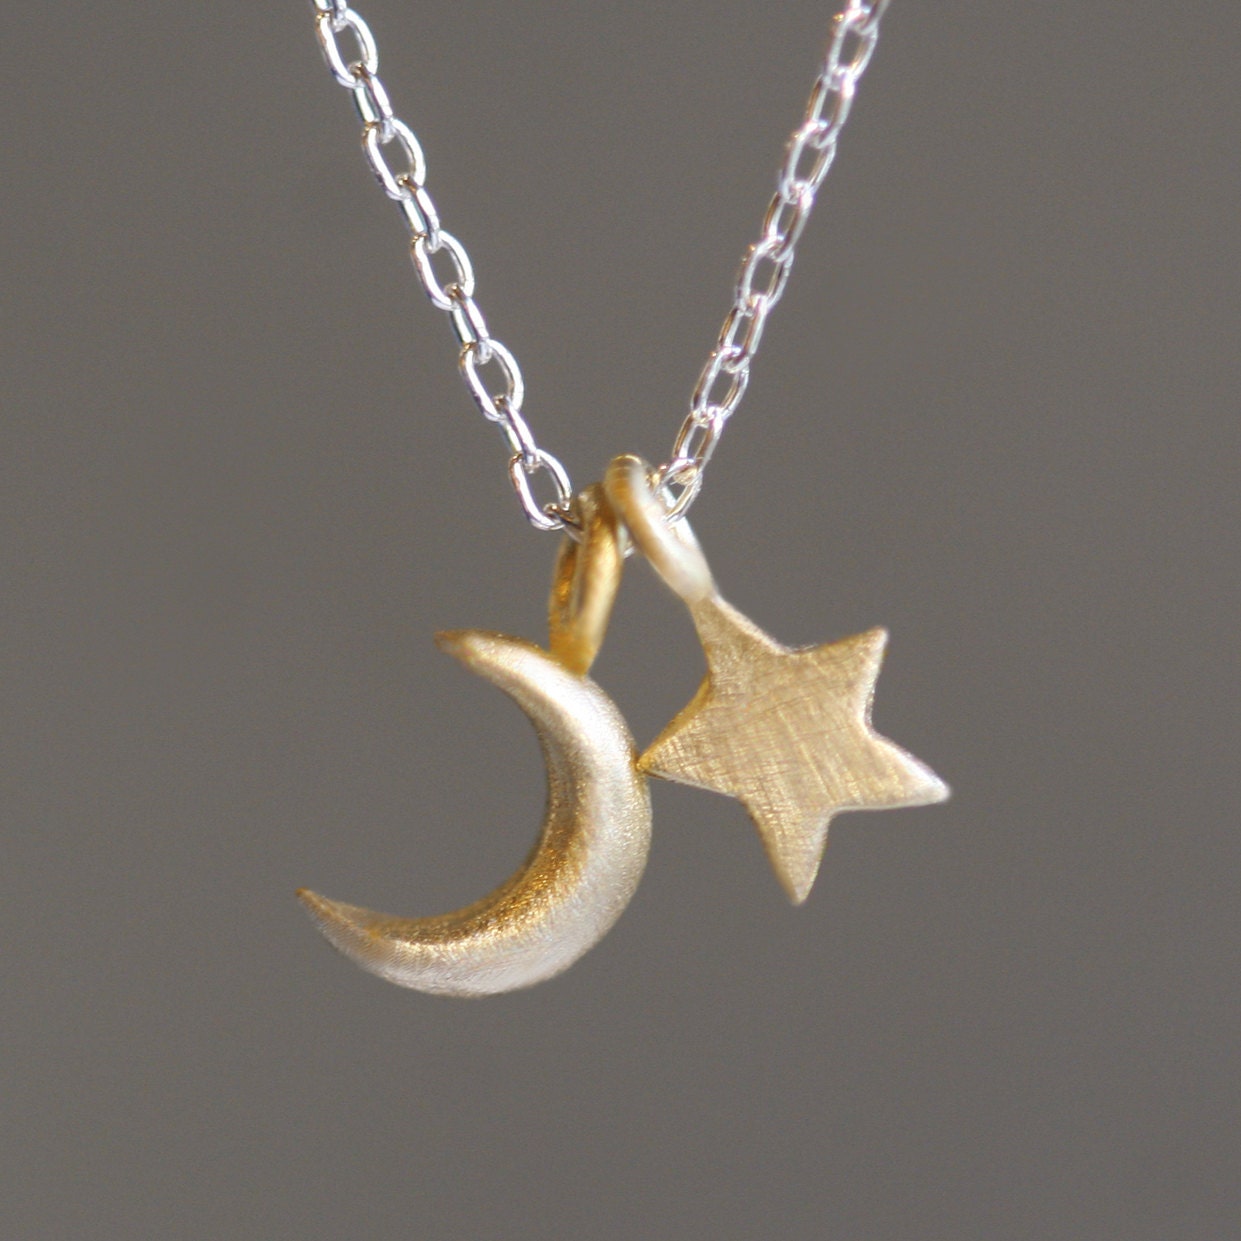 Small Moon and Star Necklace in 14K and Sterling Silver